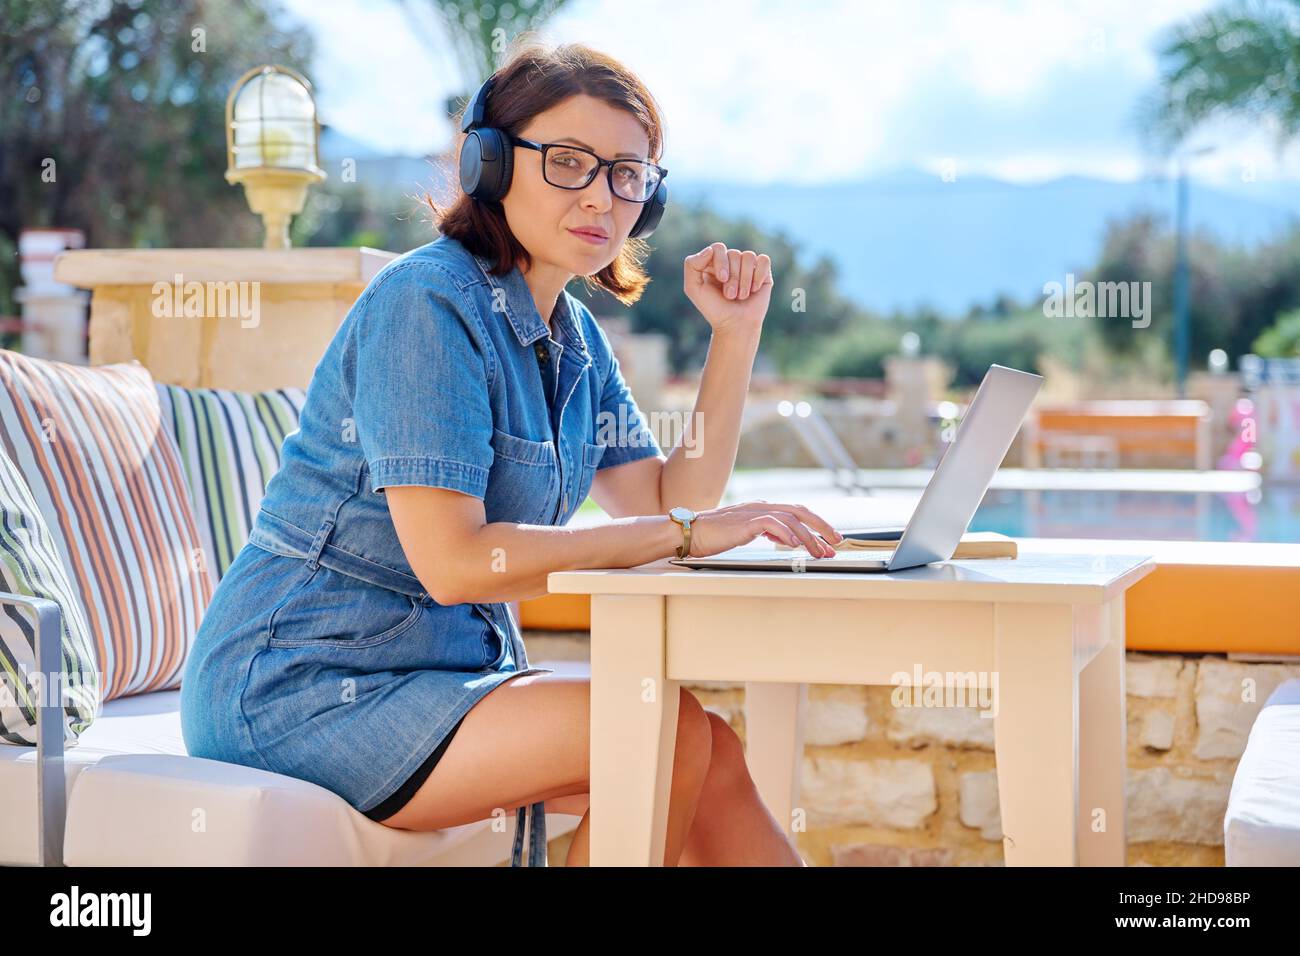 Mature woman working outdoors with headphones using laptop. Stock Photo